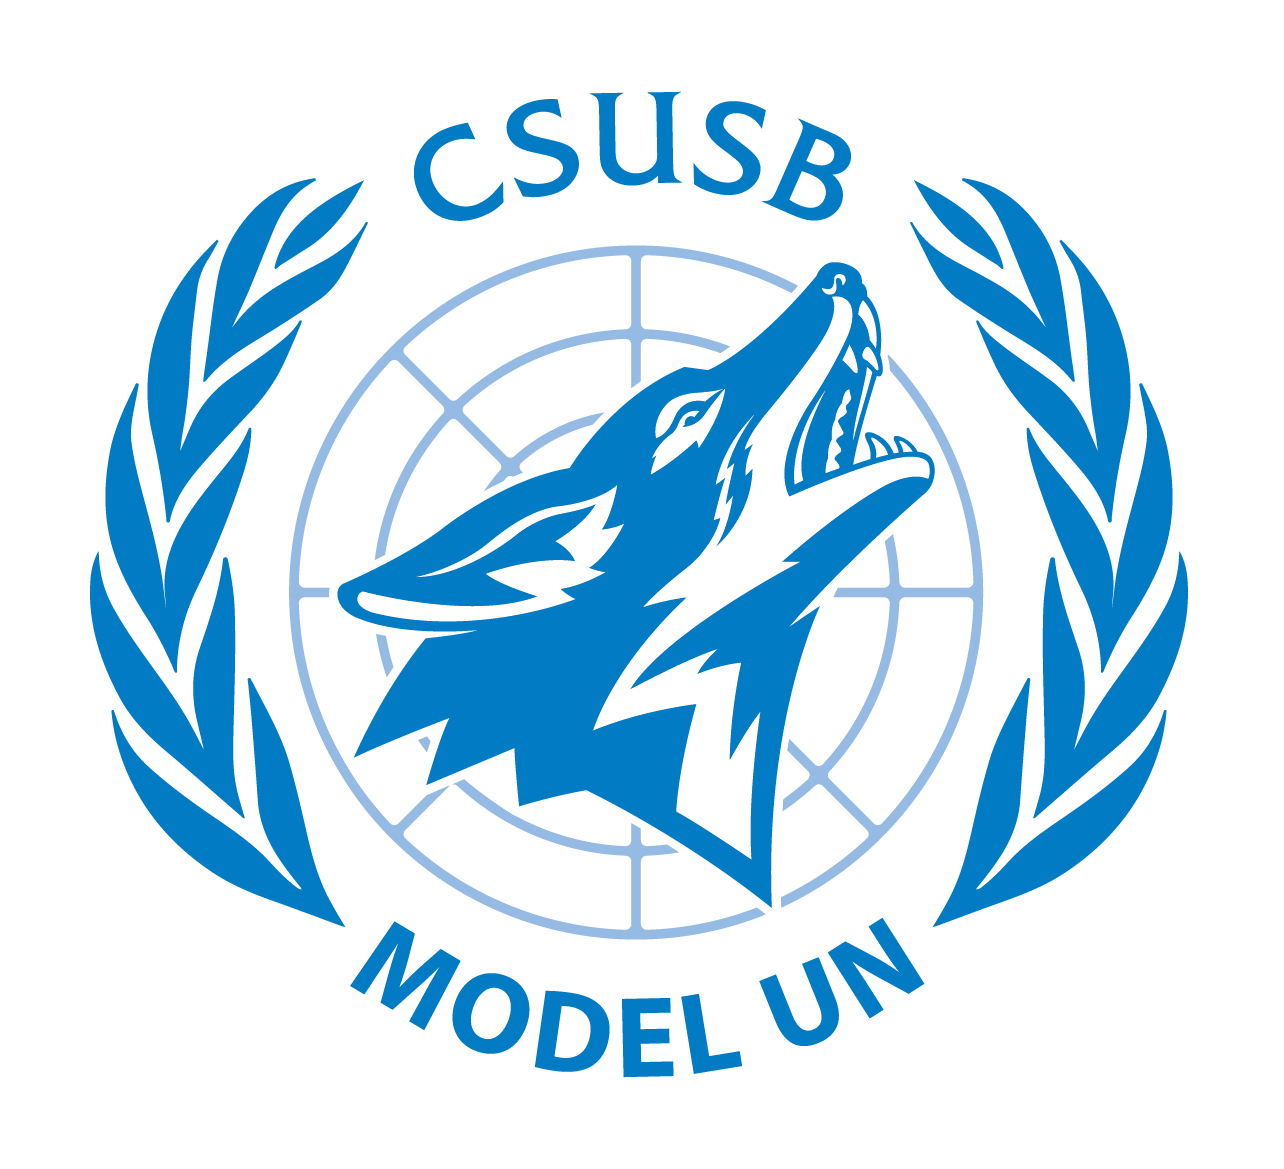 Official seal for the CSUSB Model United Nations Program